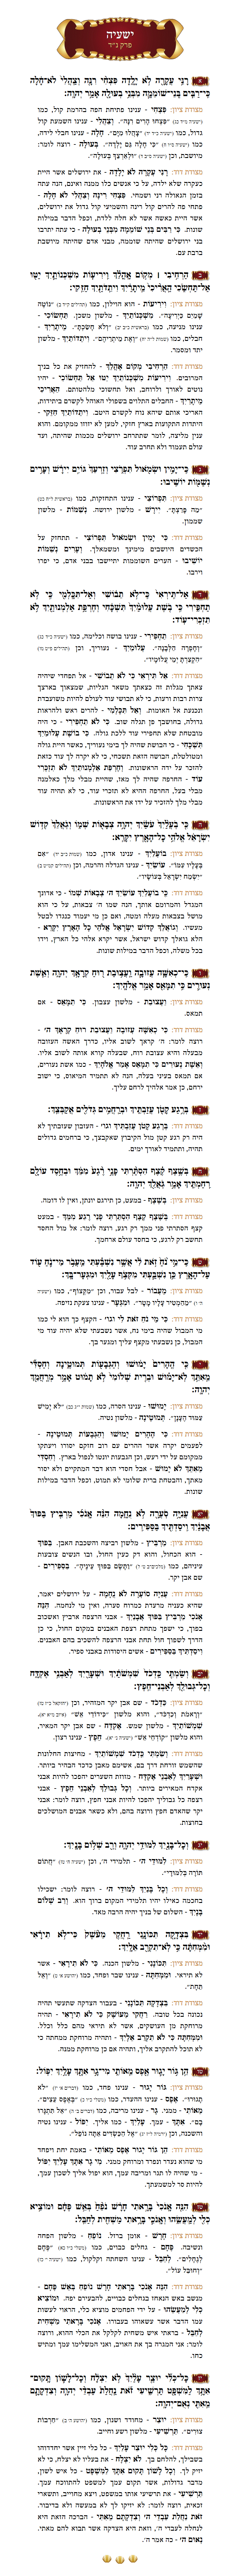 Sefer Yeshayohu Chapter 54 with commentary